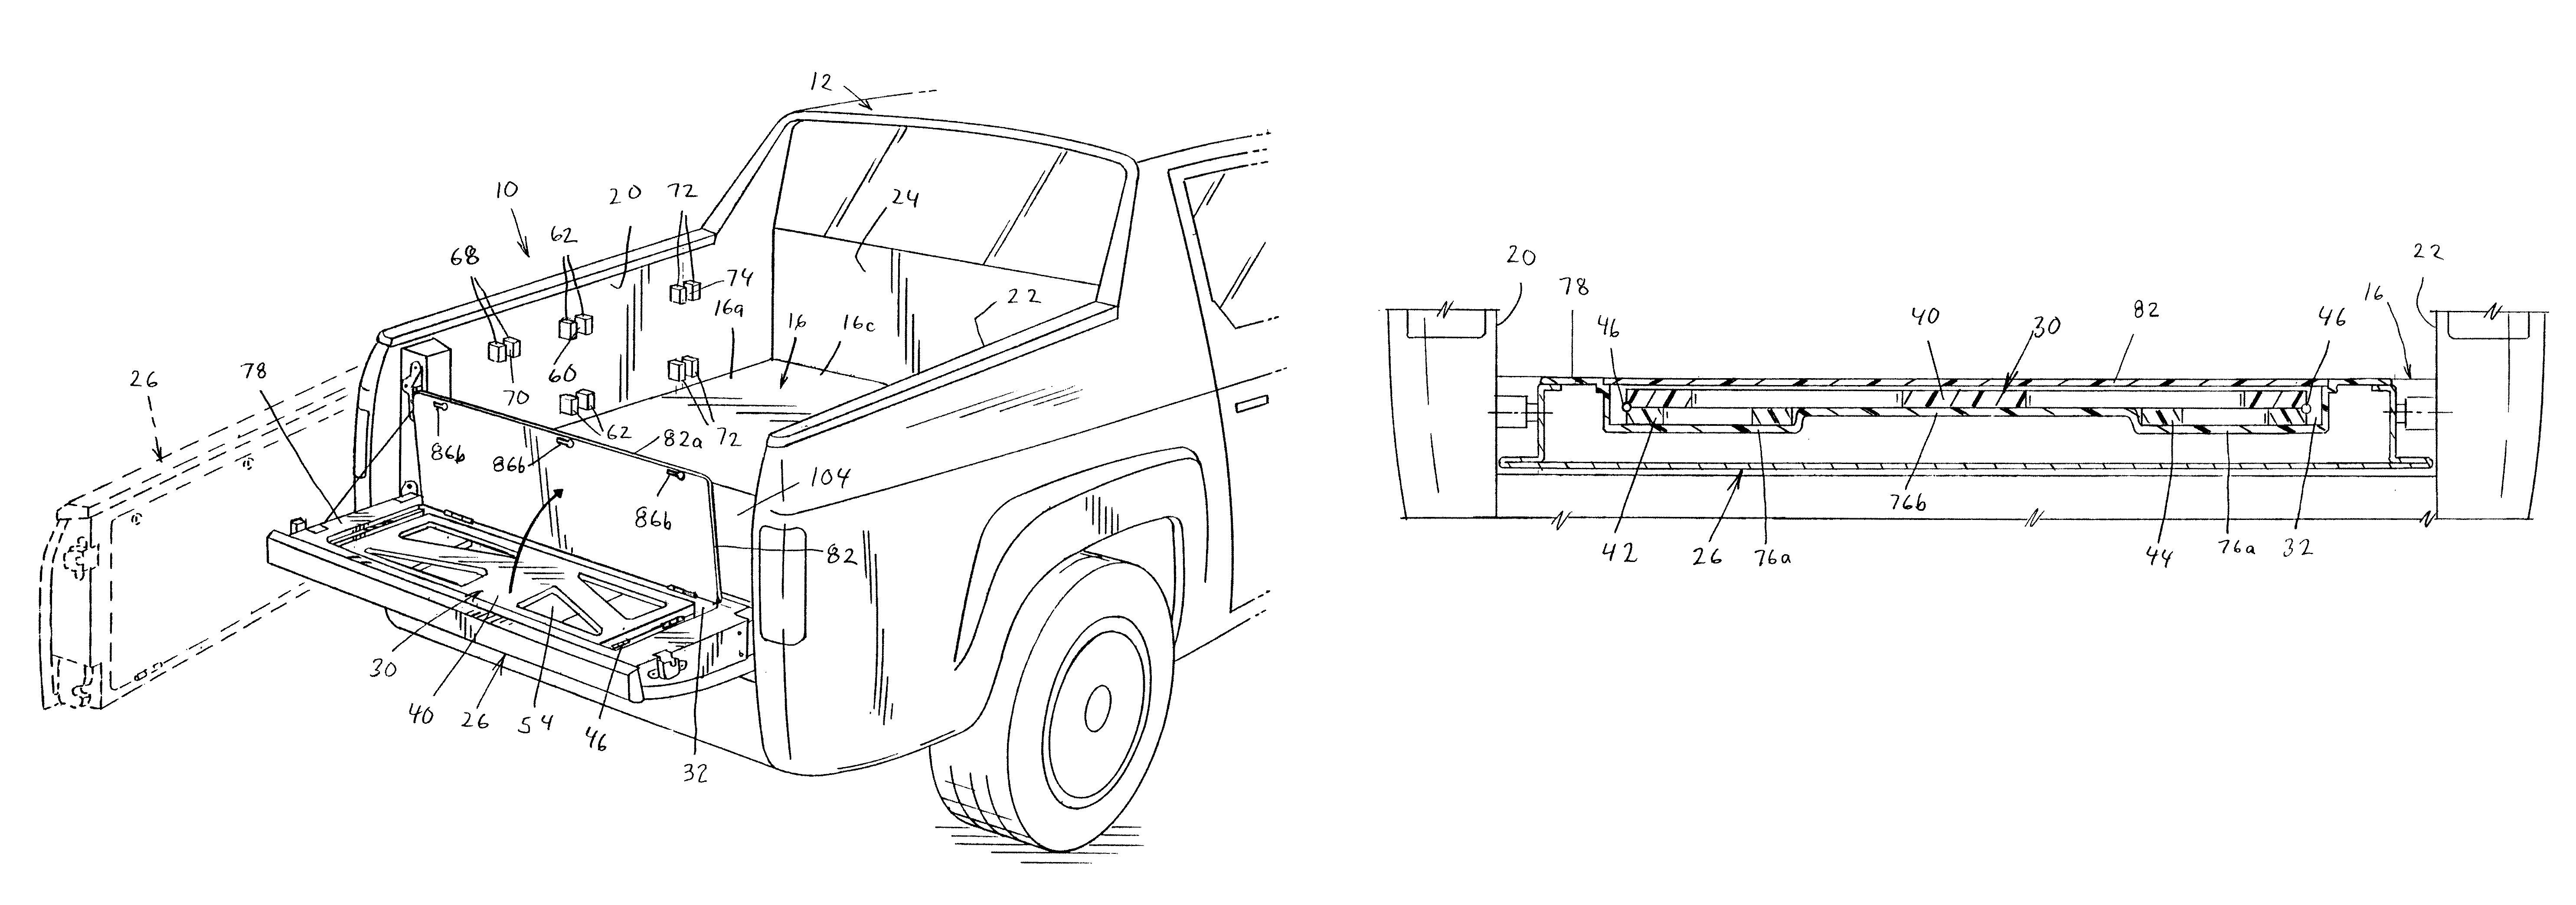 Vehicle load-carrying bed system having bed divider